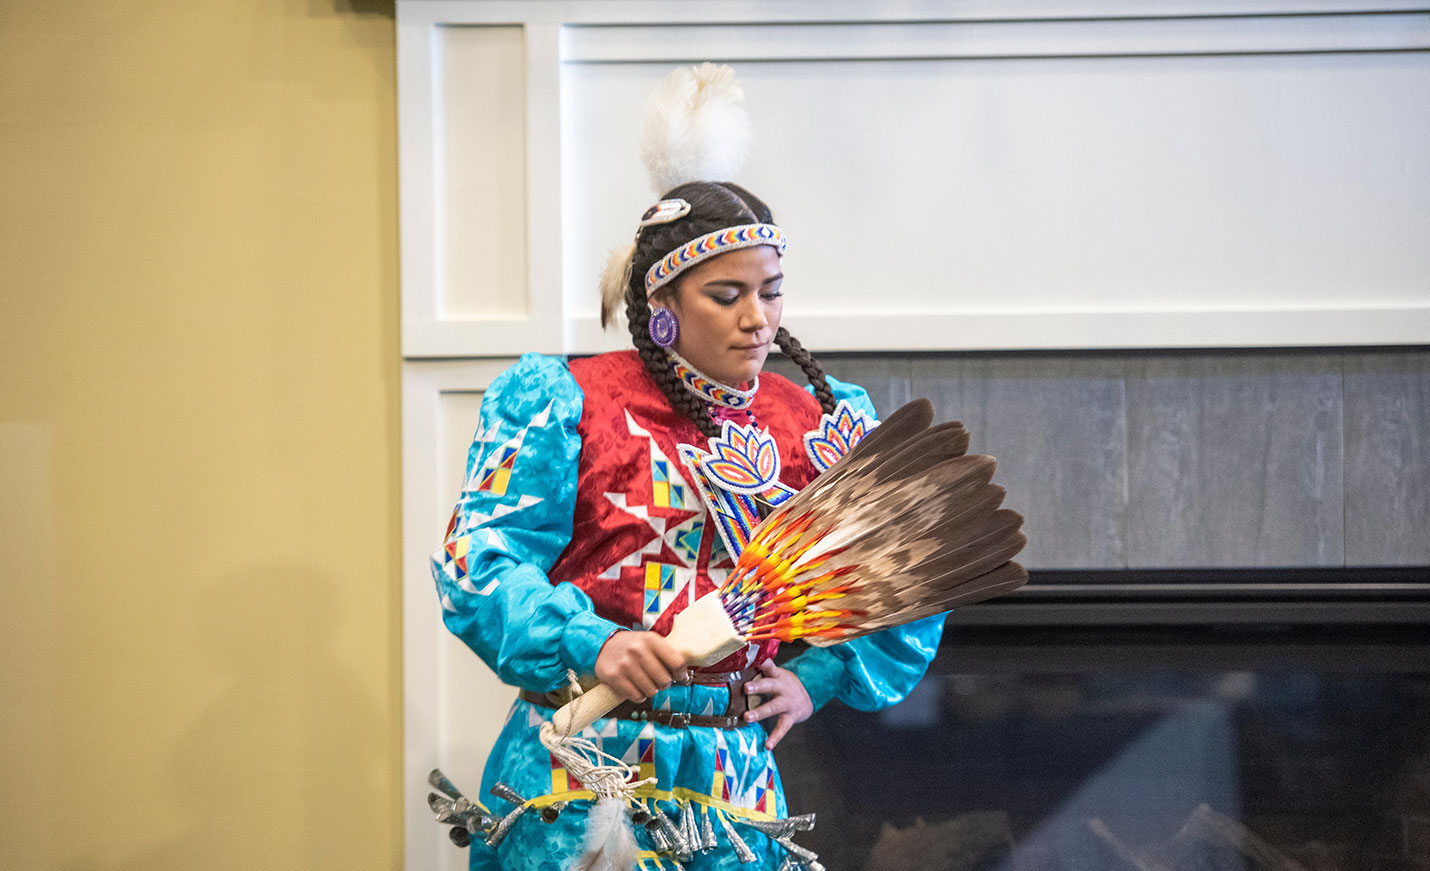 A woman in colorful Native American attire holds a bouquet of feathers while performing a dance